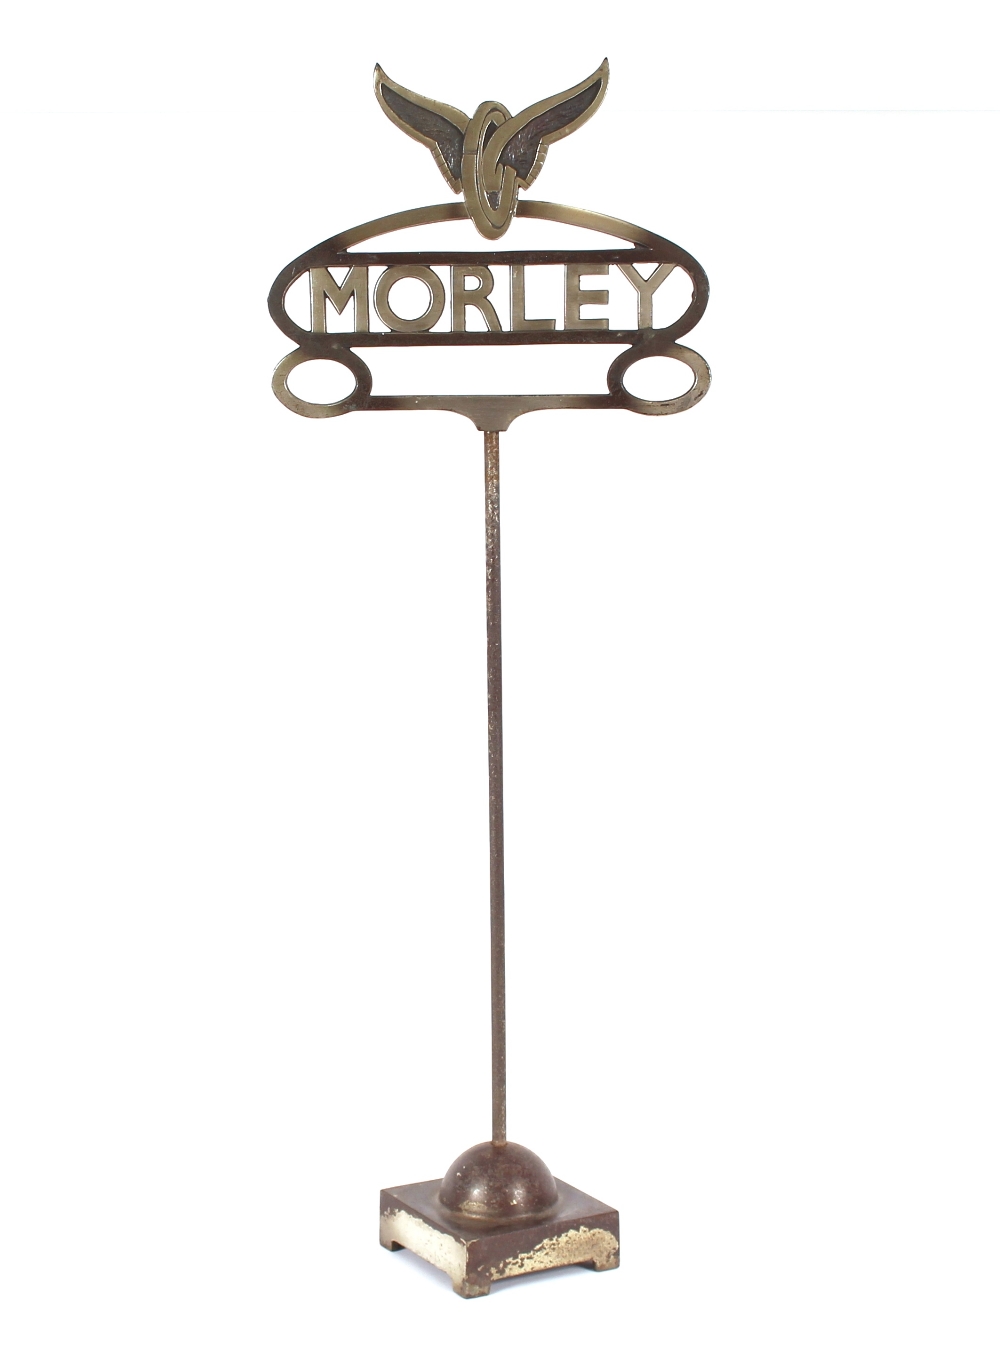 A metalware shop display stand, for Morley Stockings, 76cm high